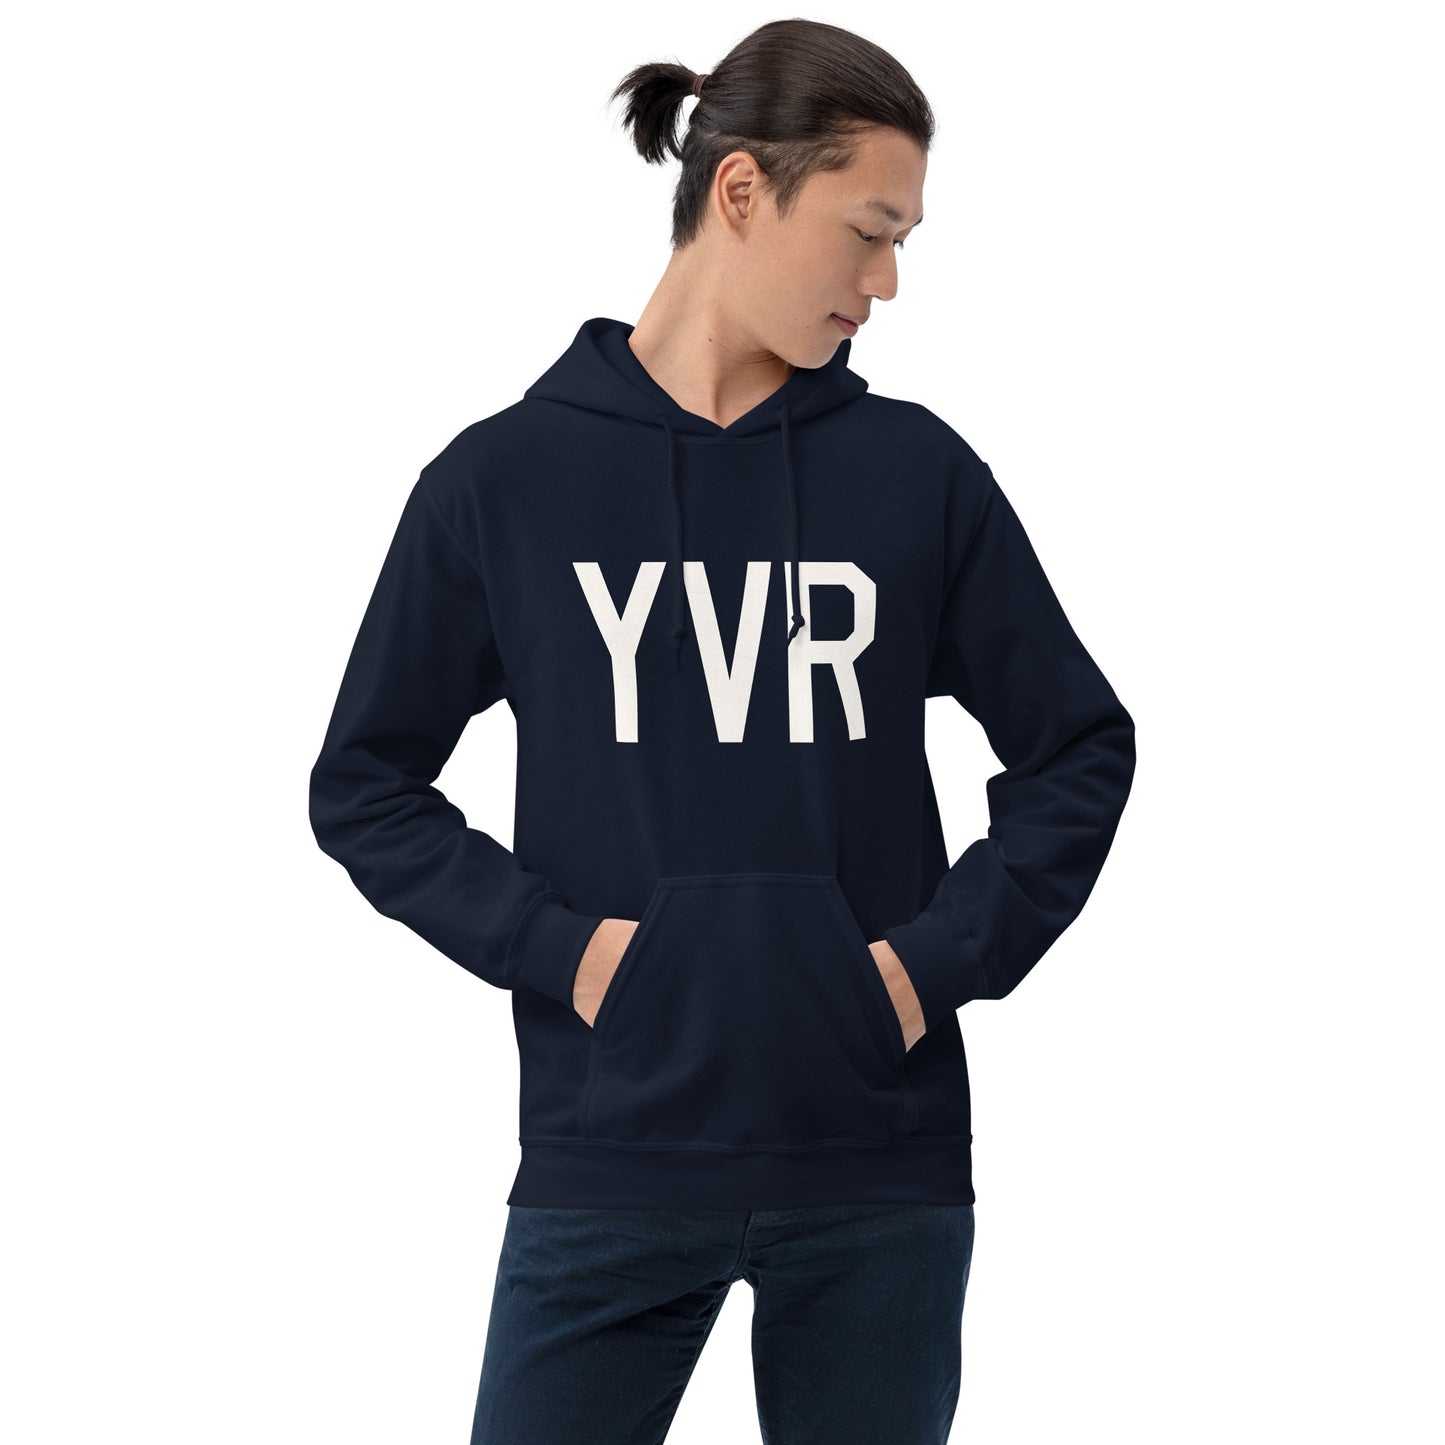 Unisex Hoodie - White Graphic • YVR Vancouver • YHM Designs - Image 09